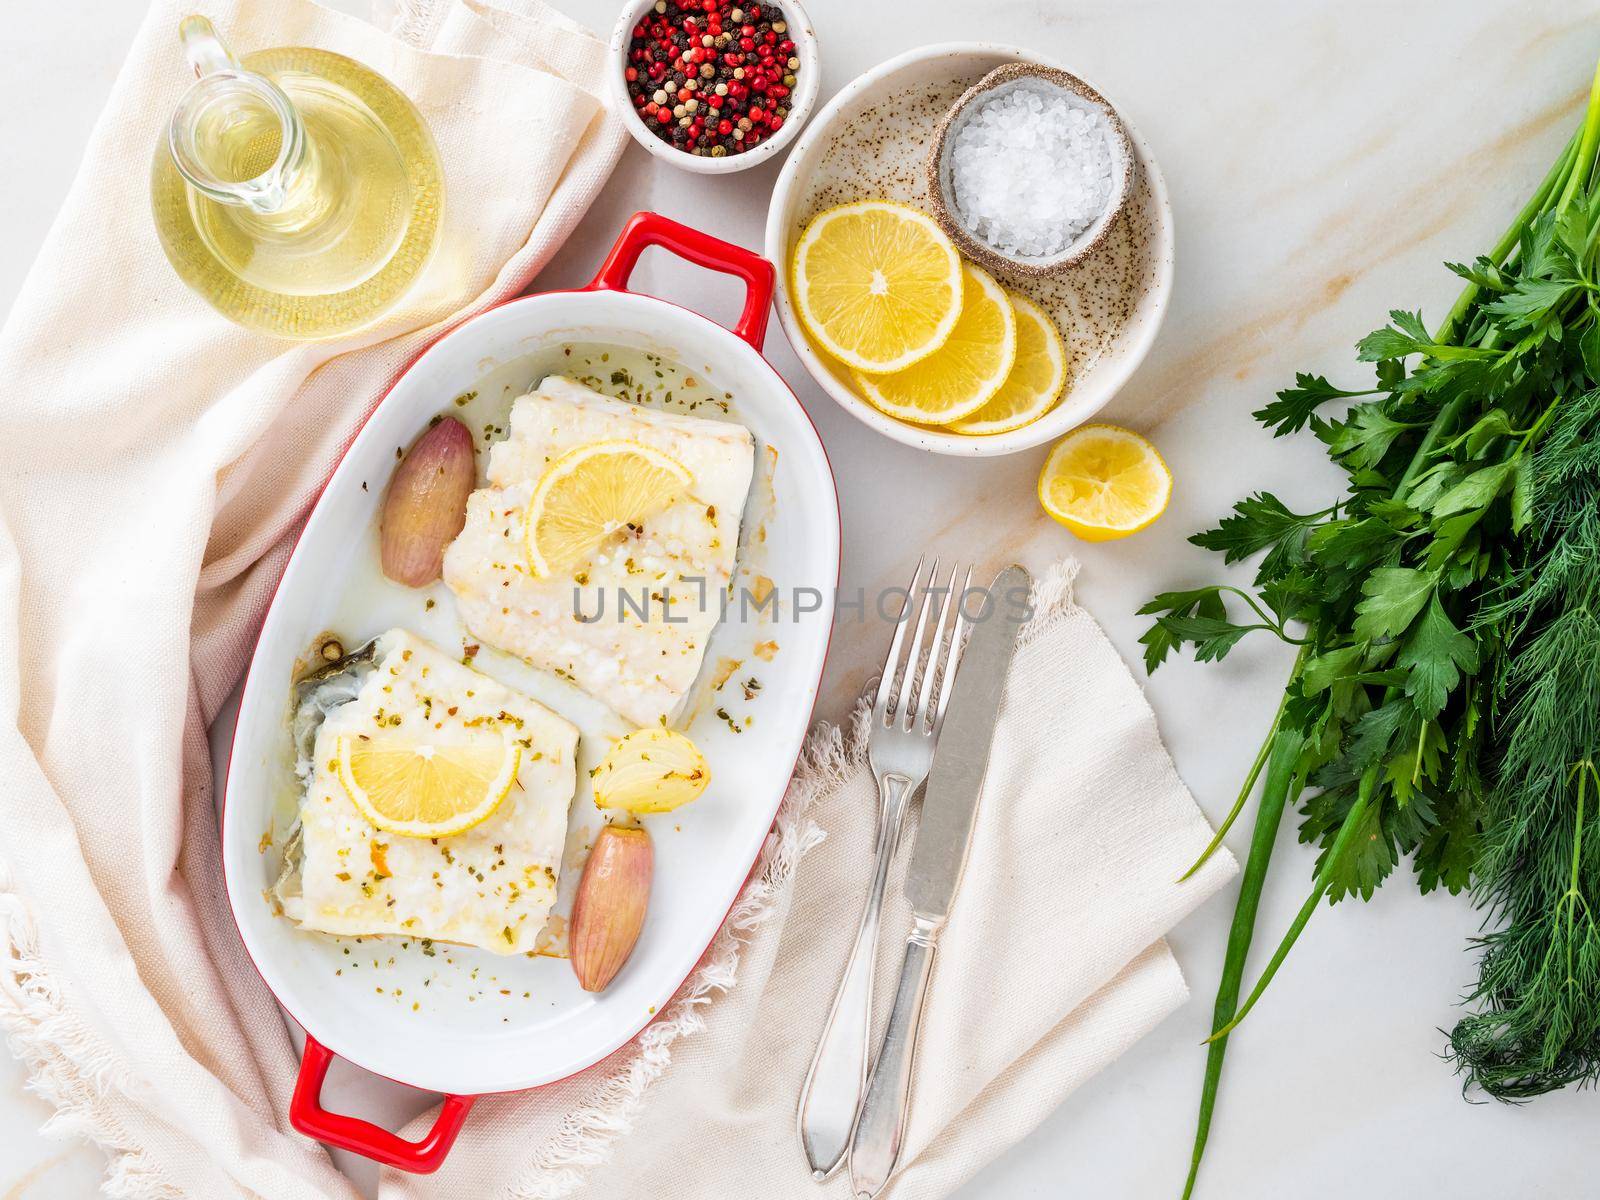 cod fish fillet, freshly cooked in oven with onion in porcelain dish for baking, lemon on plate by NataBene